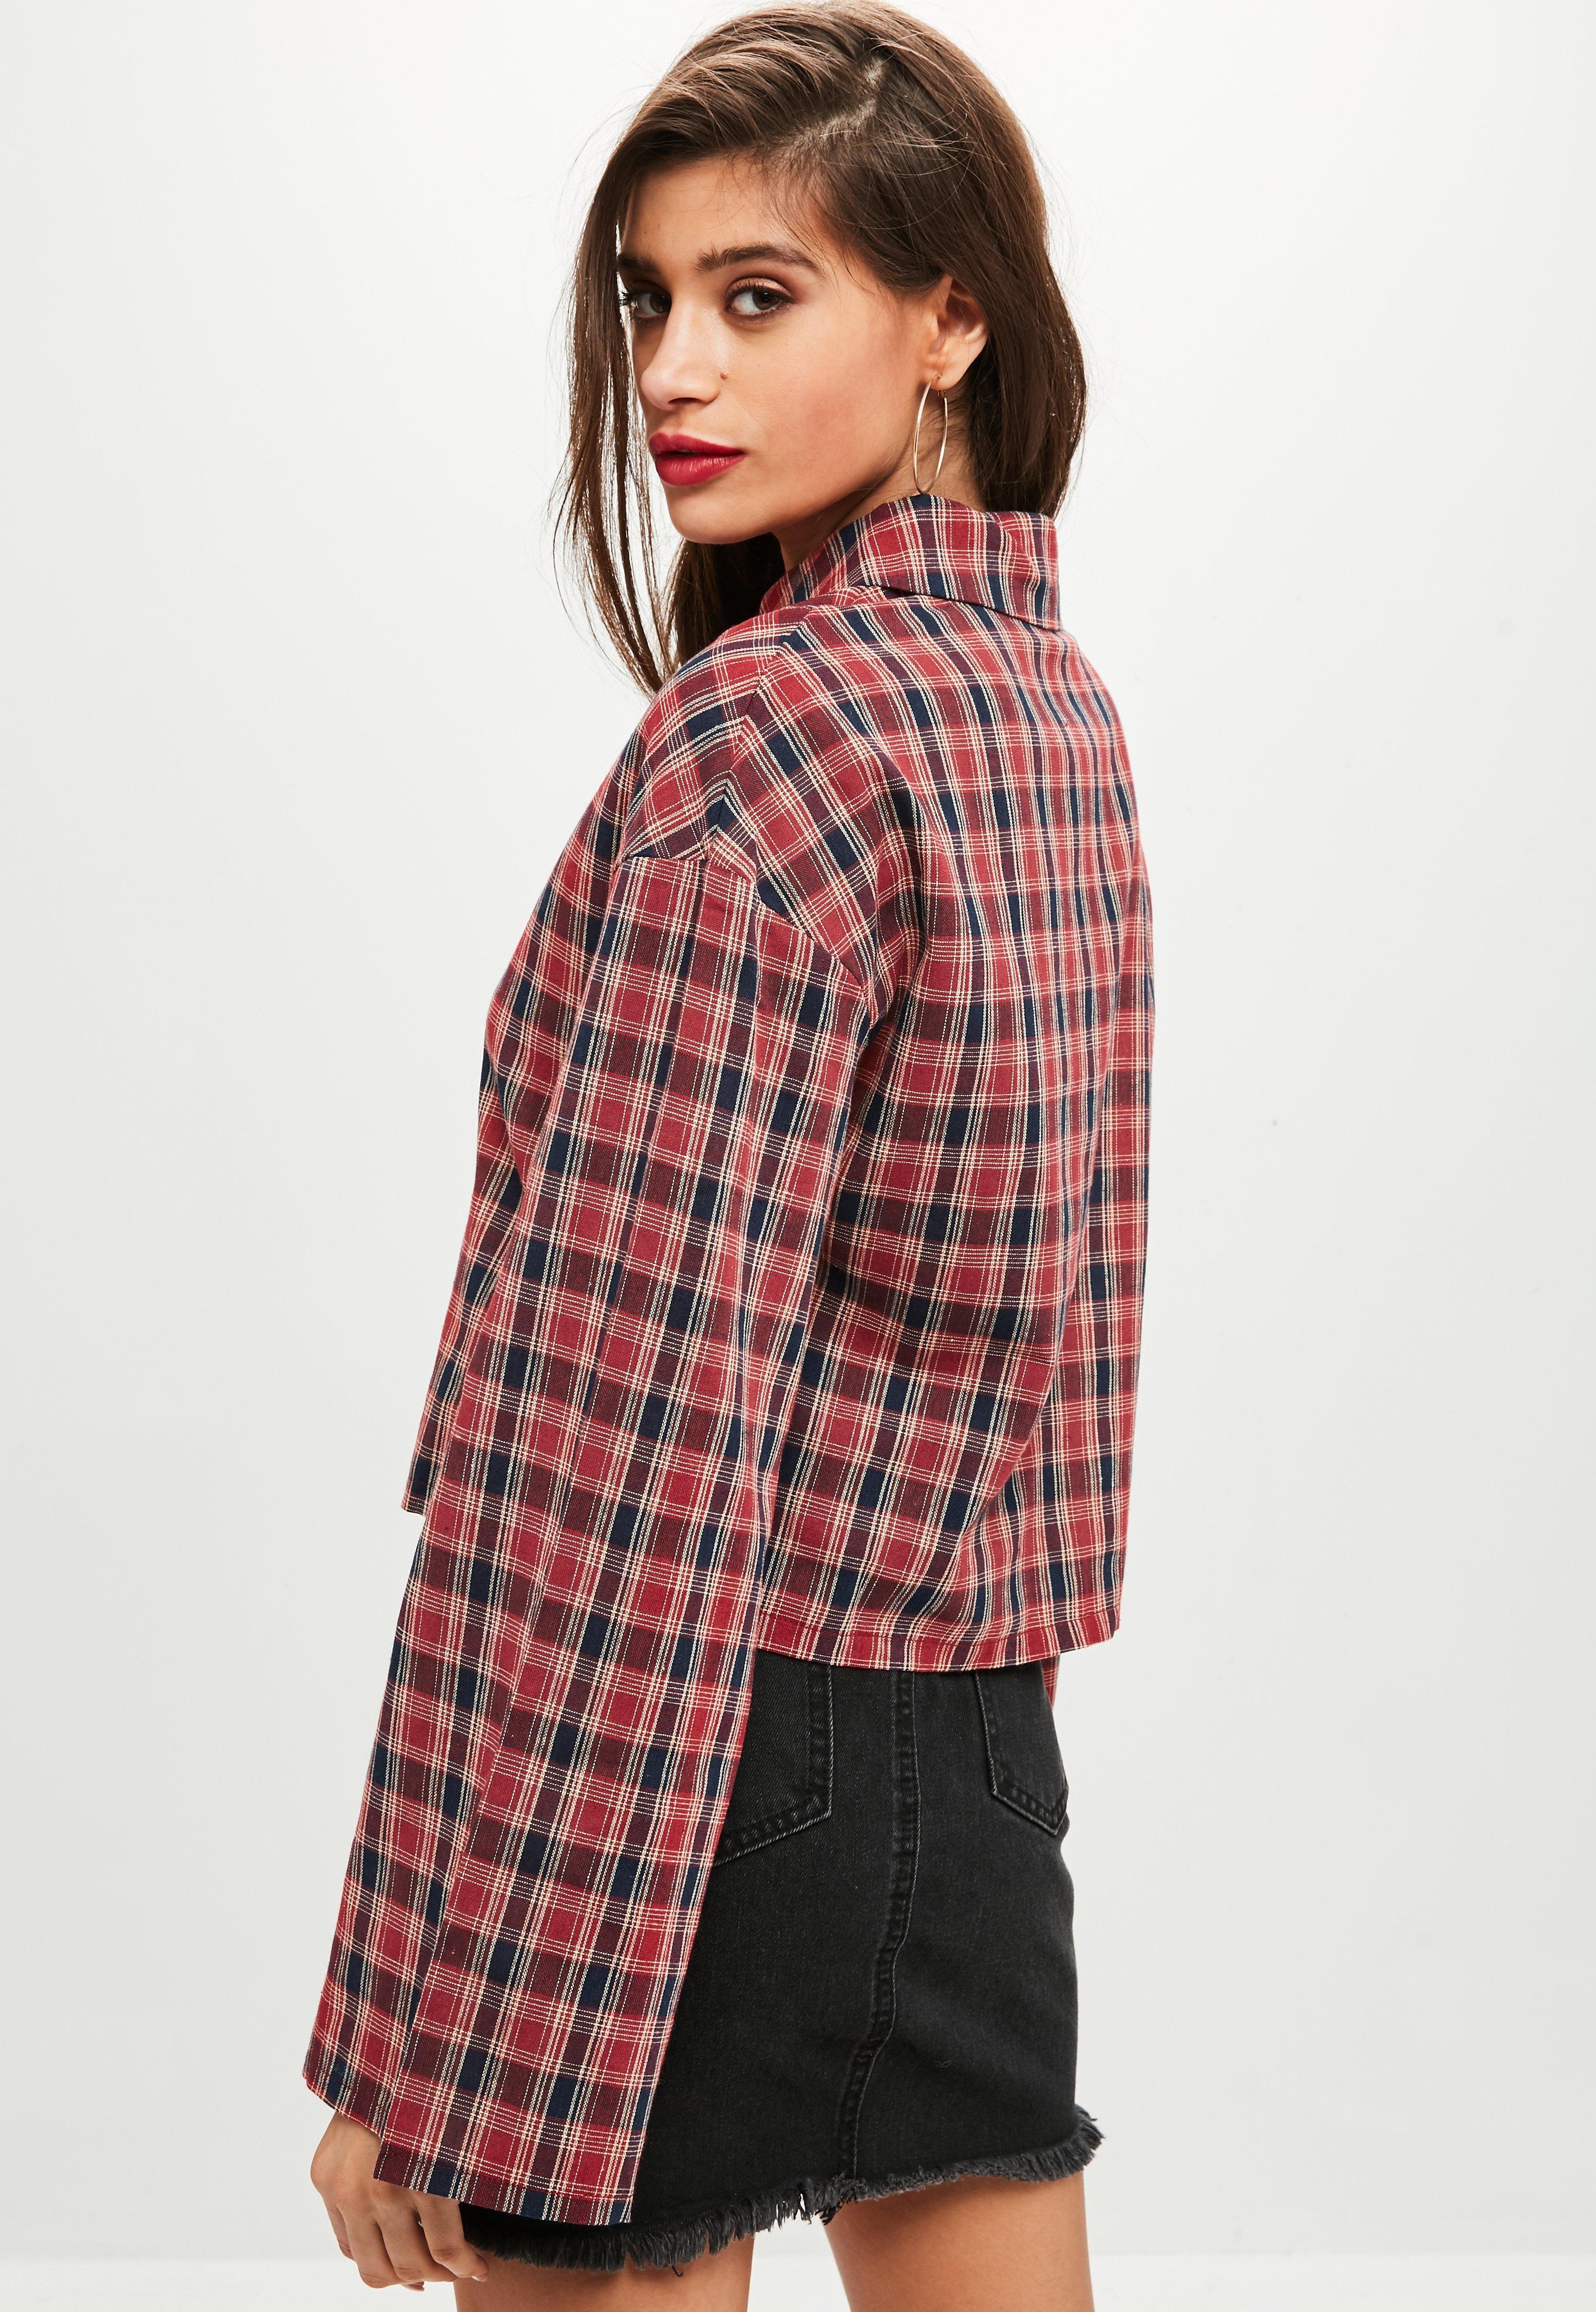 Lyst - Missguided Red Check Flared Shirt in Red